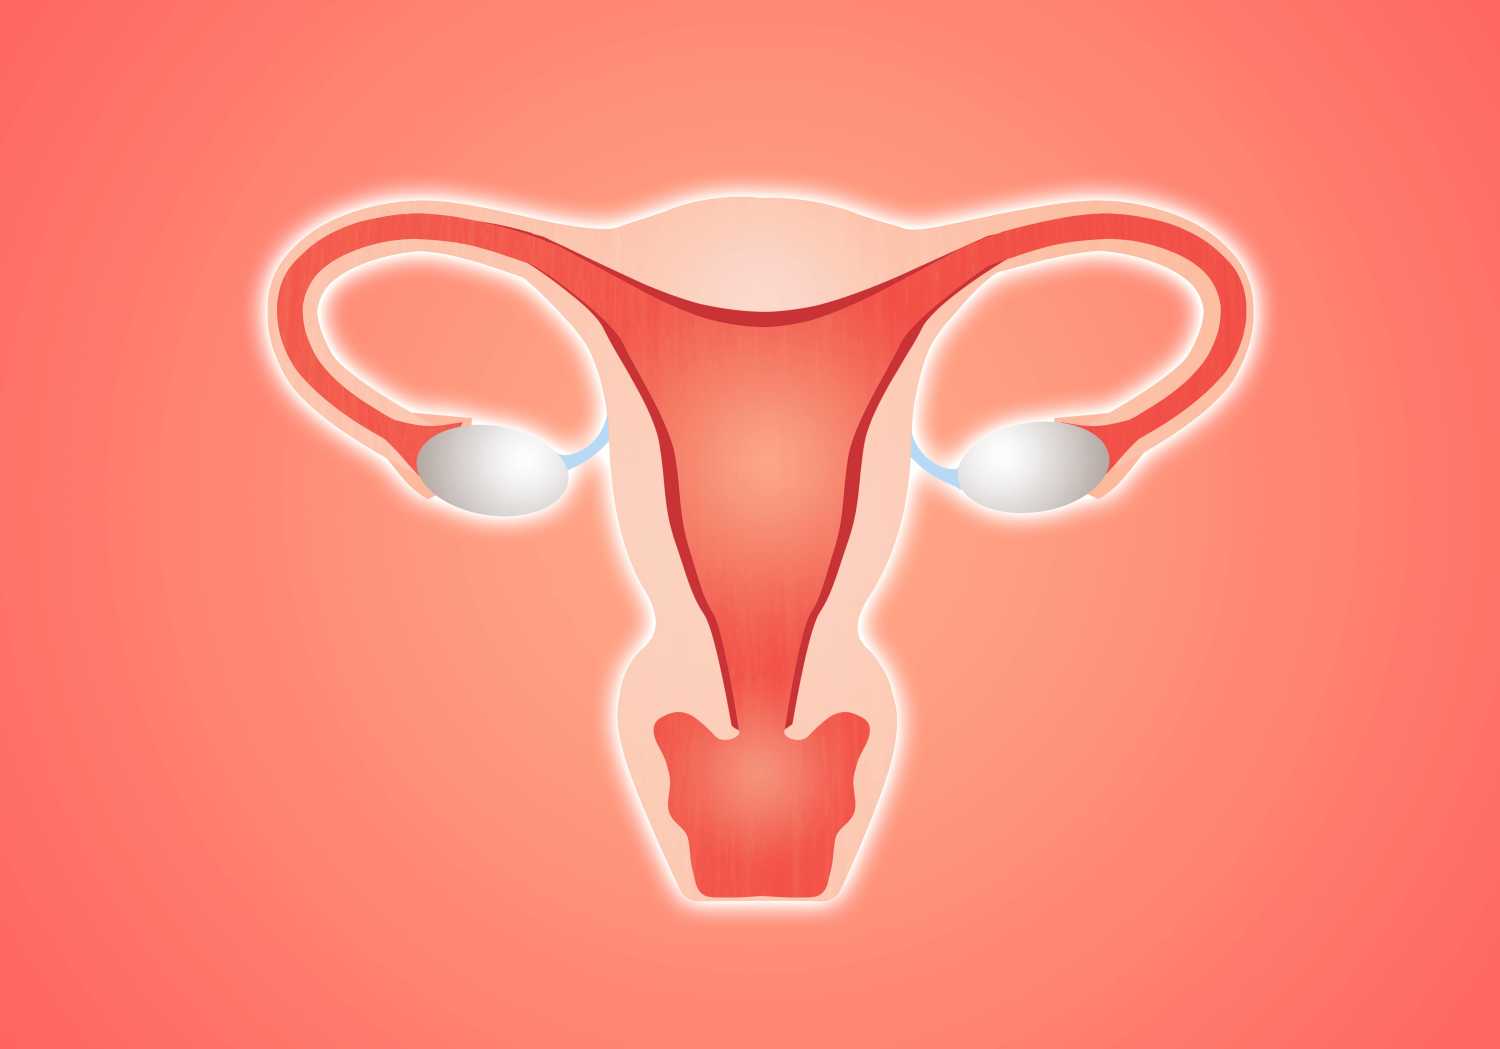 3 Telltale Signs of Problematic Ovarian Cysts: Associates in